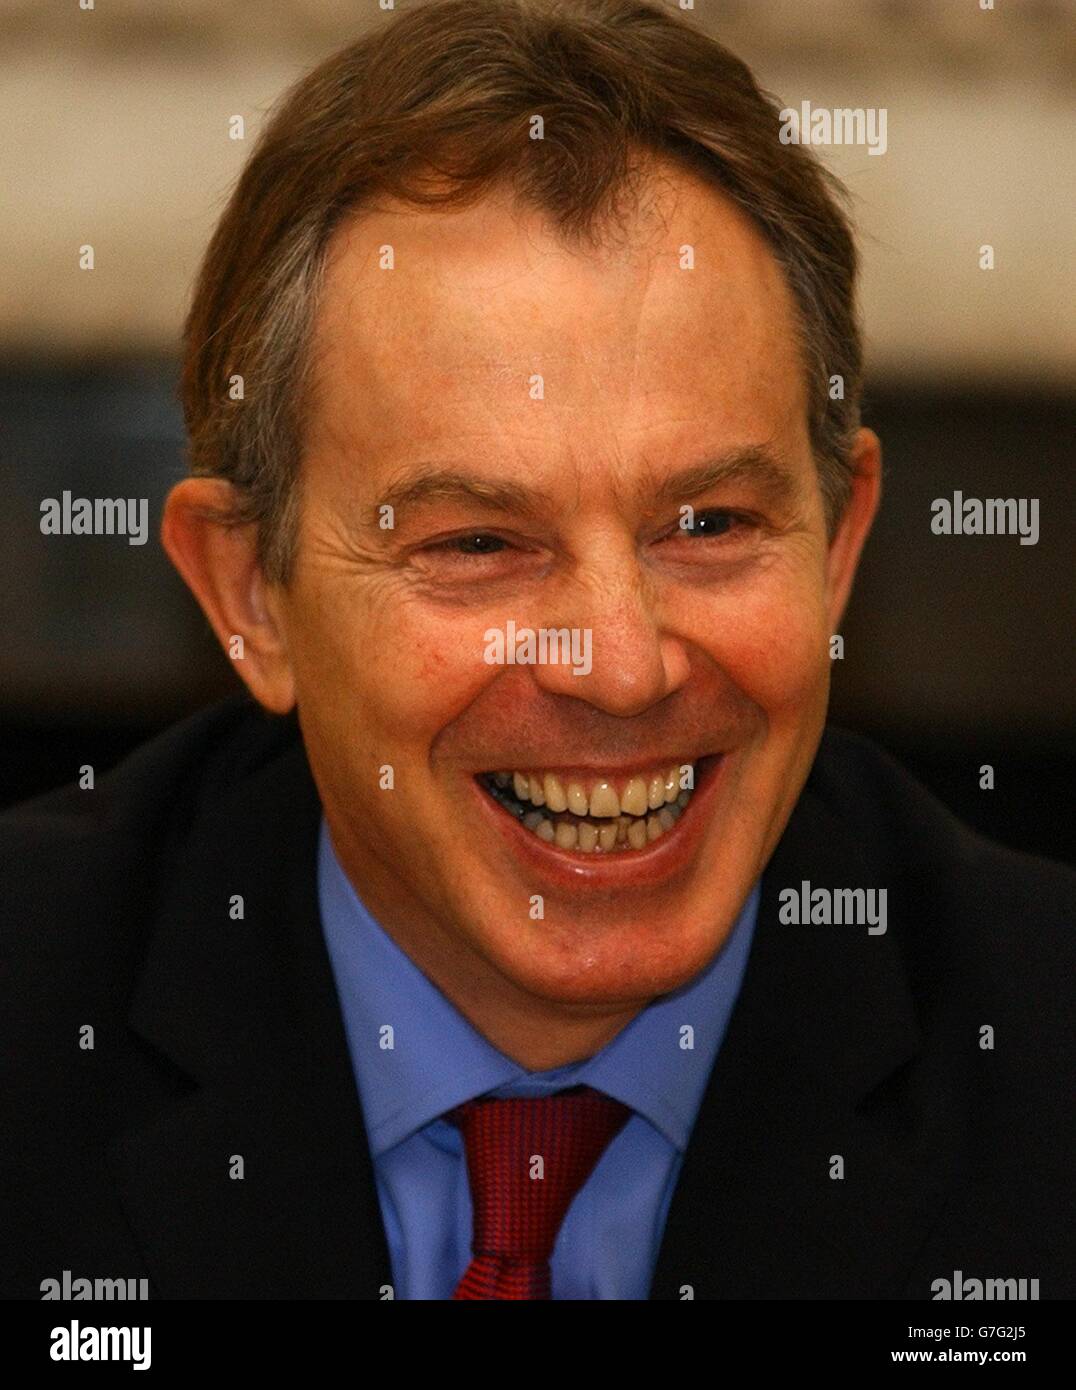 British Prime Minister Tony Blair at a breakfast meeting at Downing Street for the launch of a draft of new 'quality of life proposals'. The new proposals include plans for cleaning up local communities, a five-year environment strategy and a review of climate change policy. Stock Photo